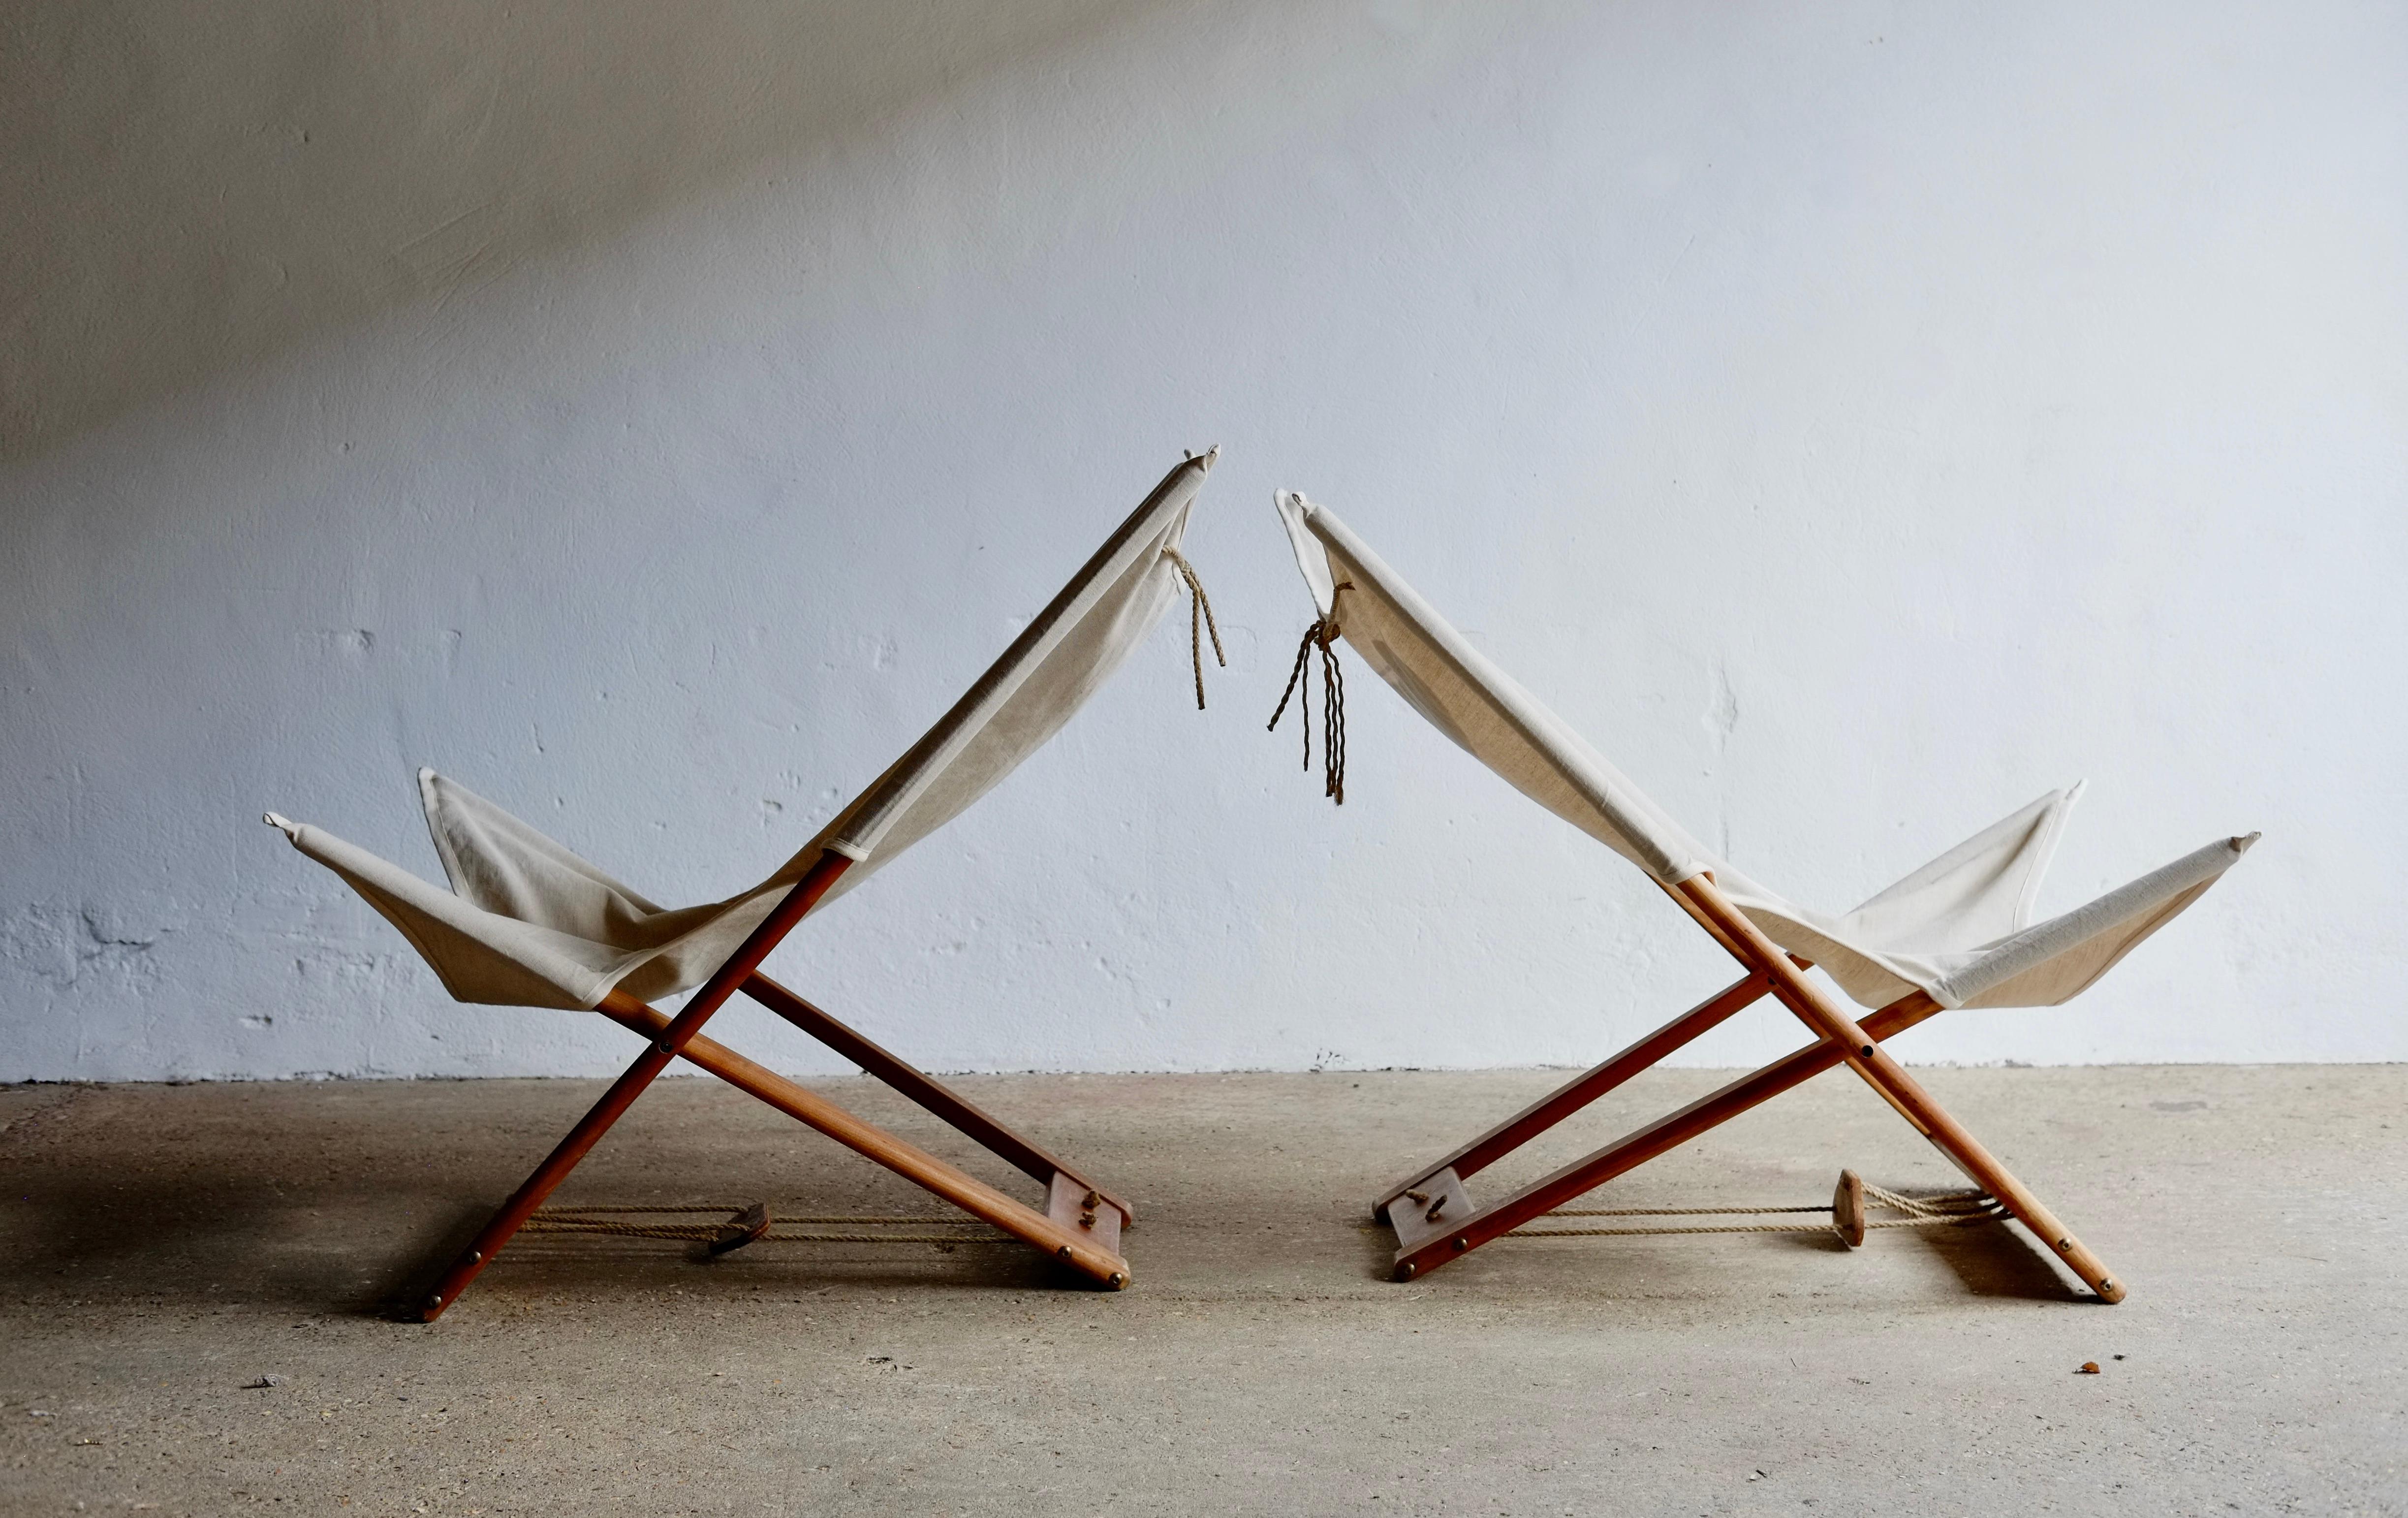 A pair of 1960's wood and canvas folding safari chairs by Hyllinge, Denmark. Featuring adjustable positions via a rope system and rope hanging pillows.
Price is for the pair.